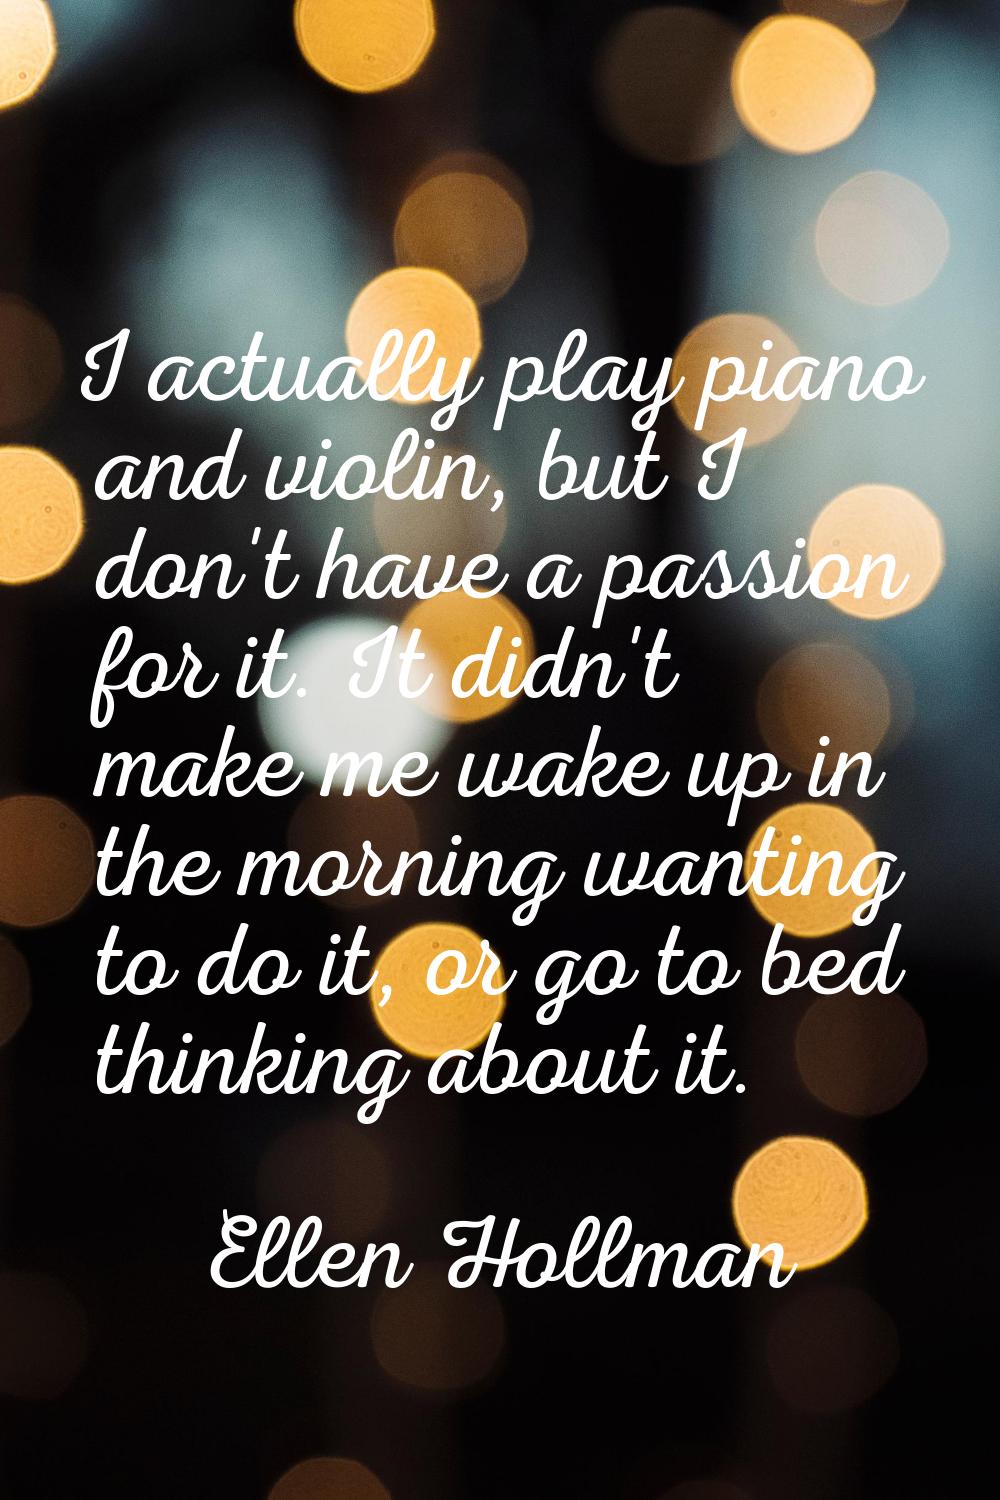 I actually play piano and violin, but I don't have a passion for it. It didn't make me wake up in t